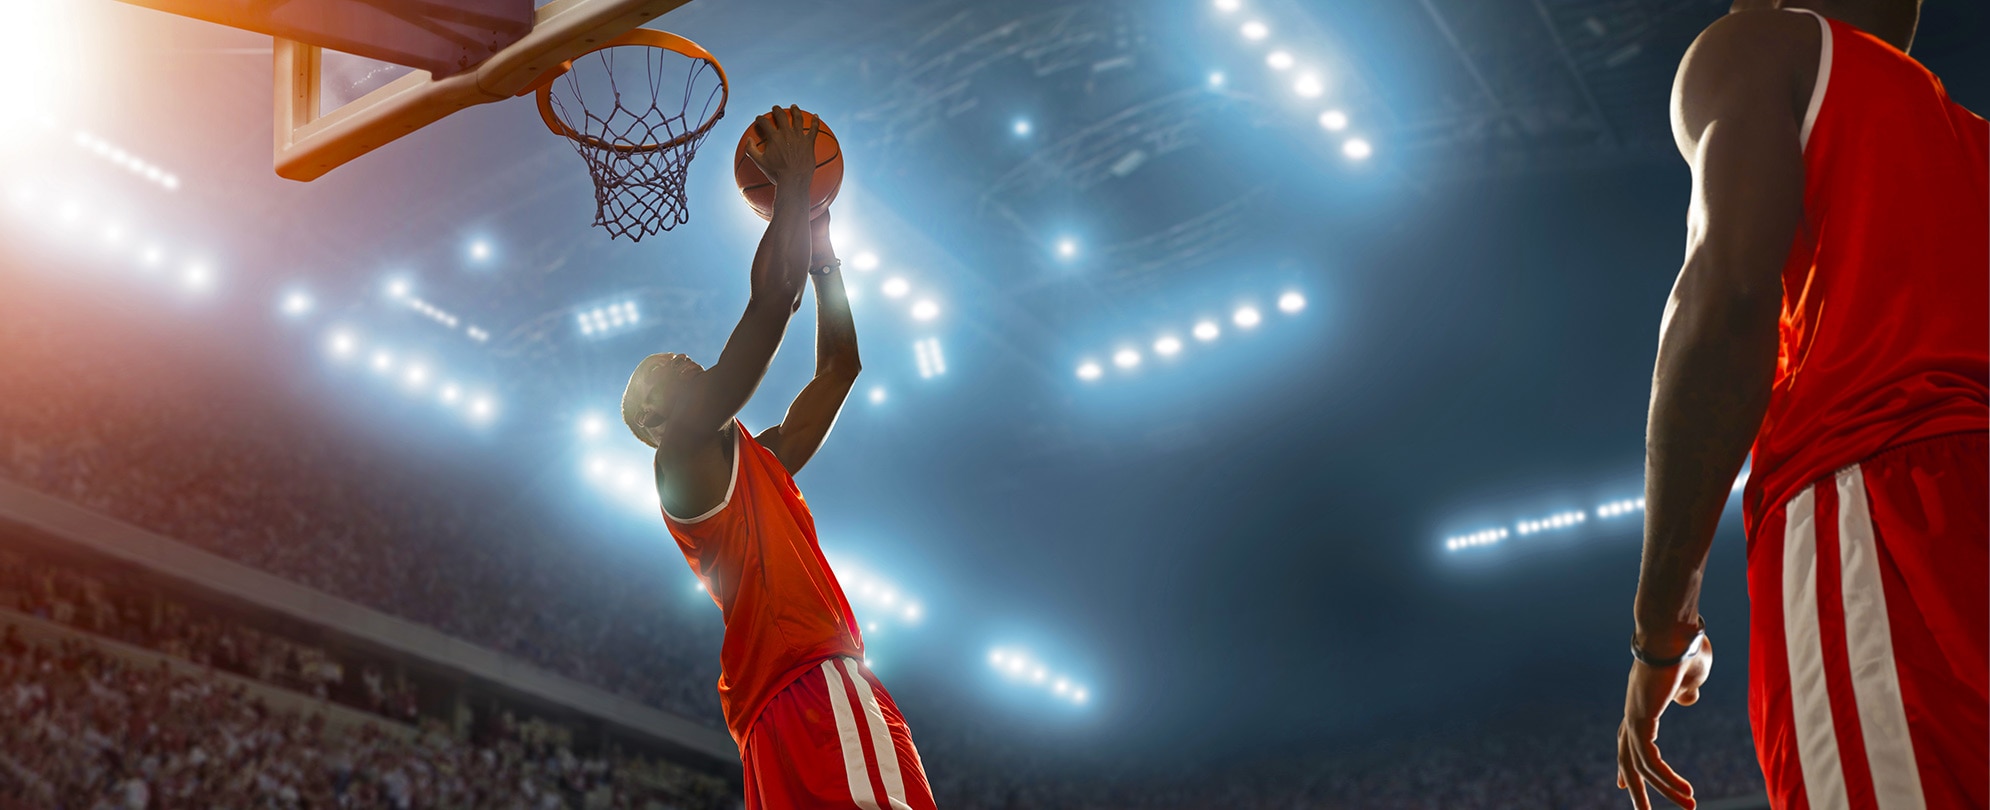 A basketball player holding a basketball and jumping for a reverse dunk at the net